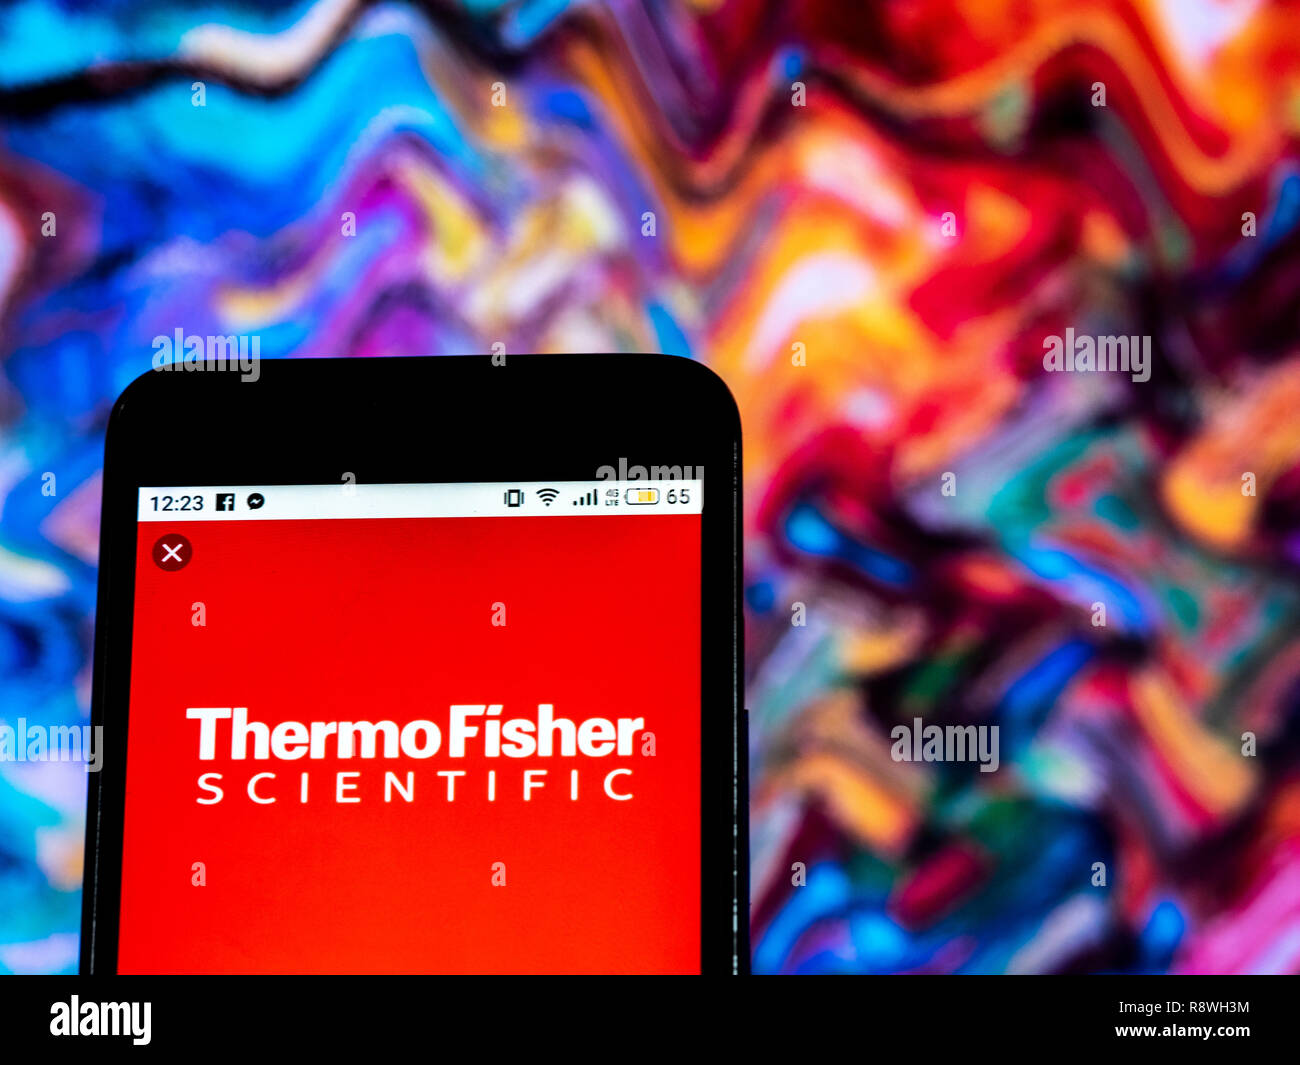 Thermo Fisher Scientific Company logo seen displayed on smart phone Stock Photo